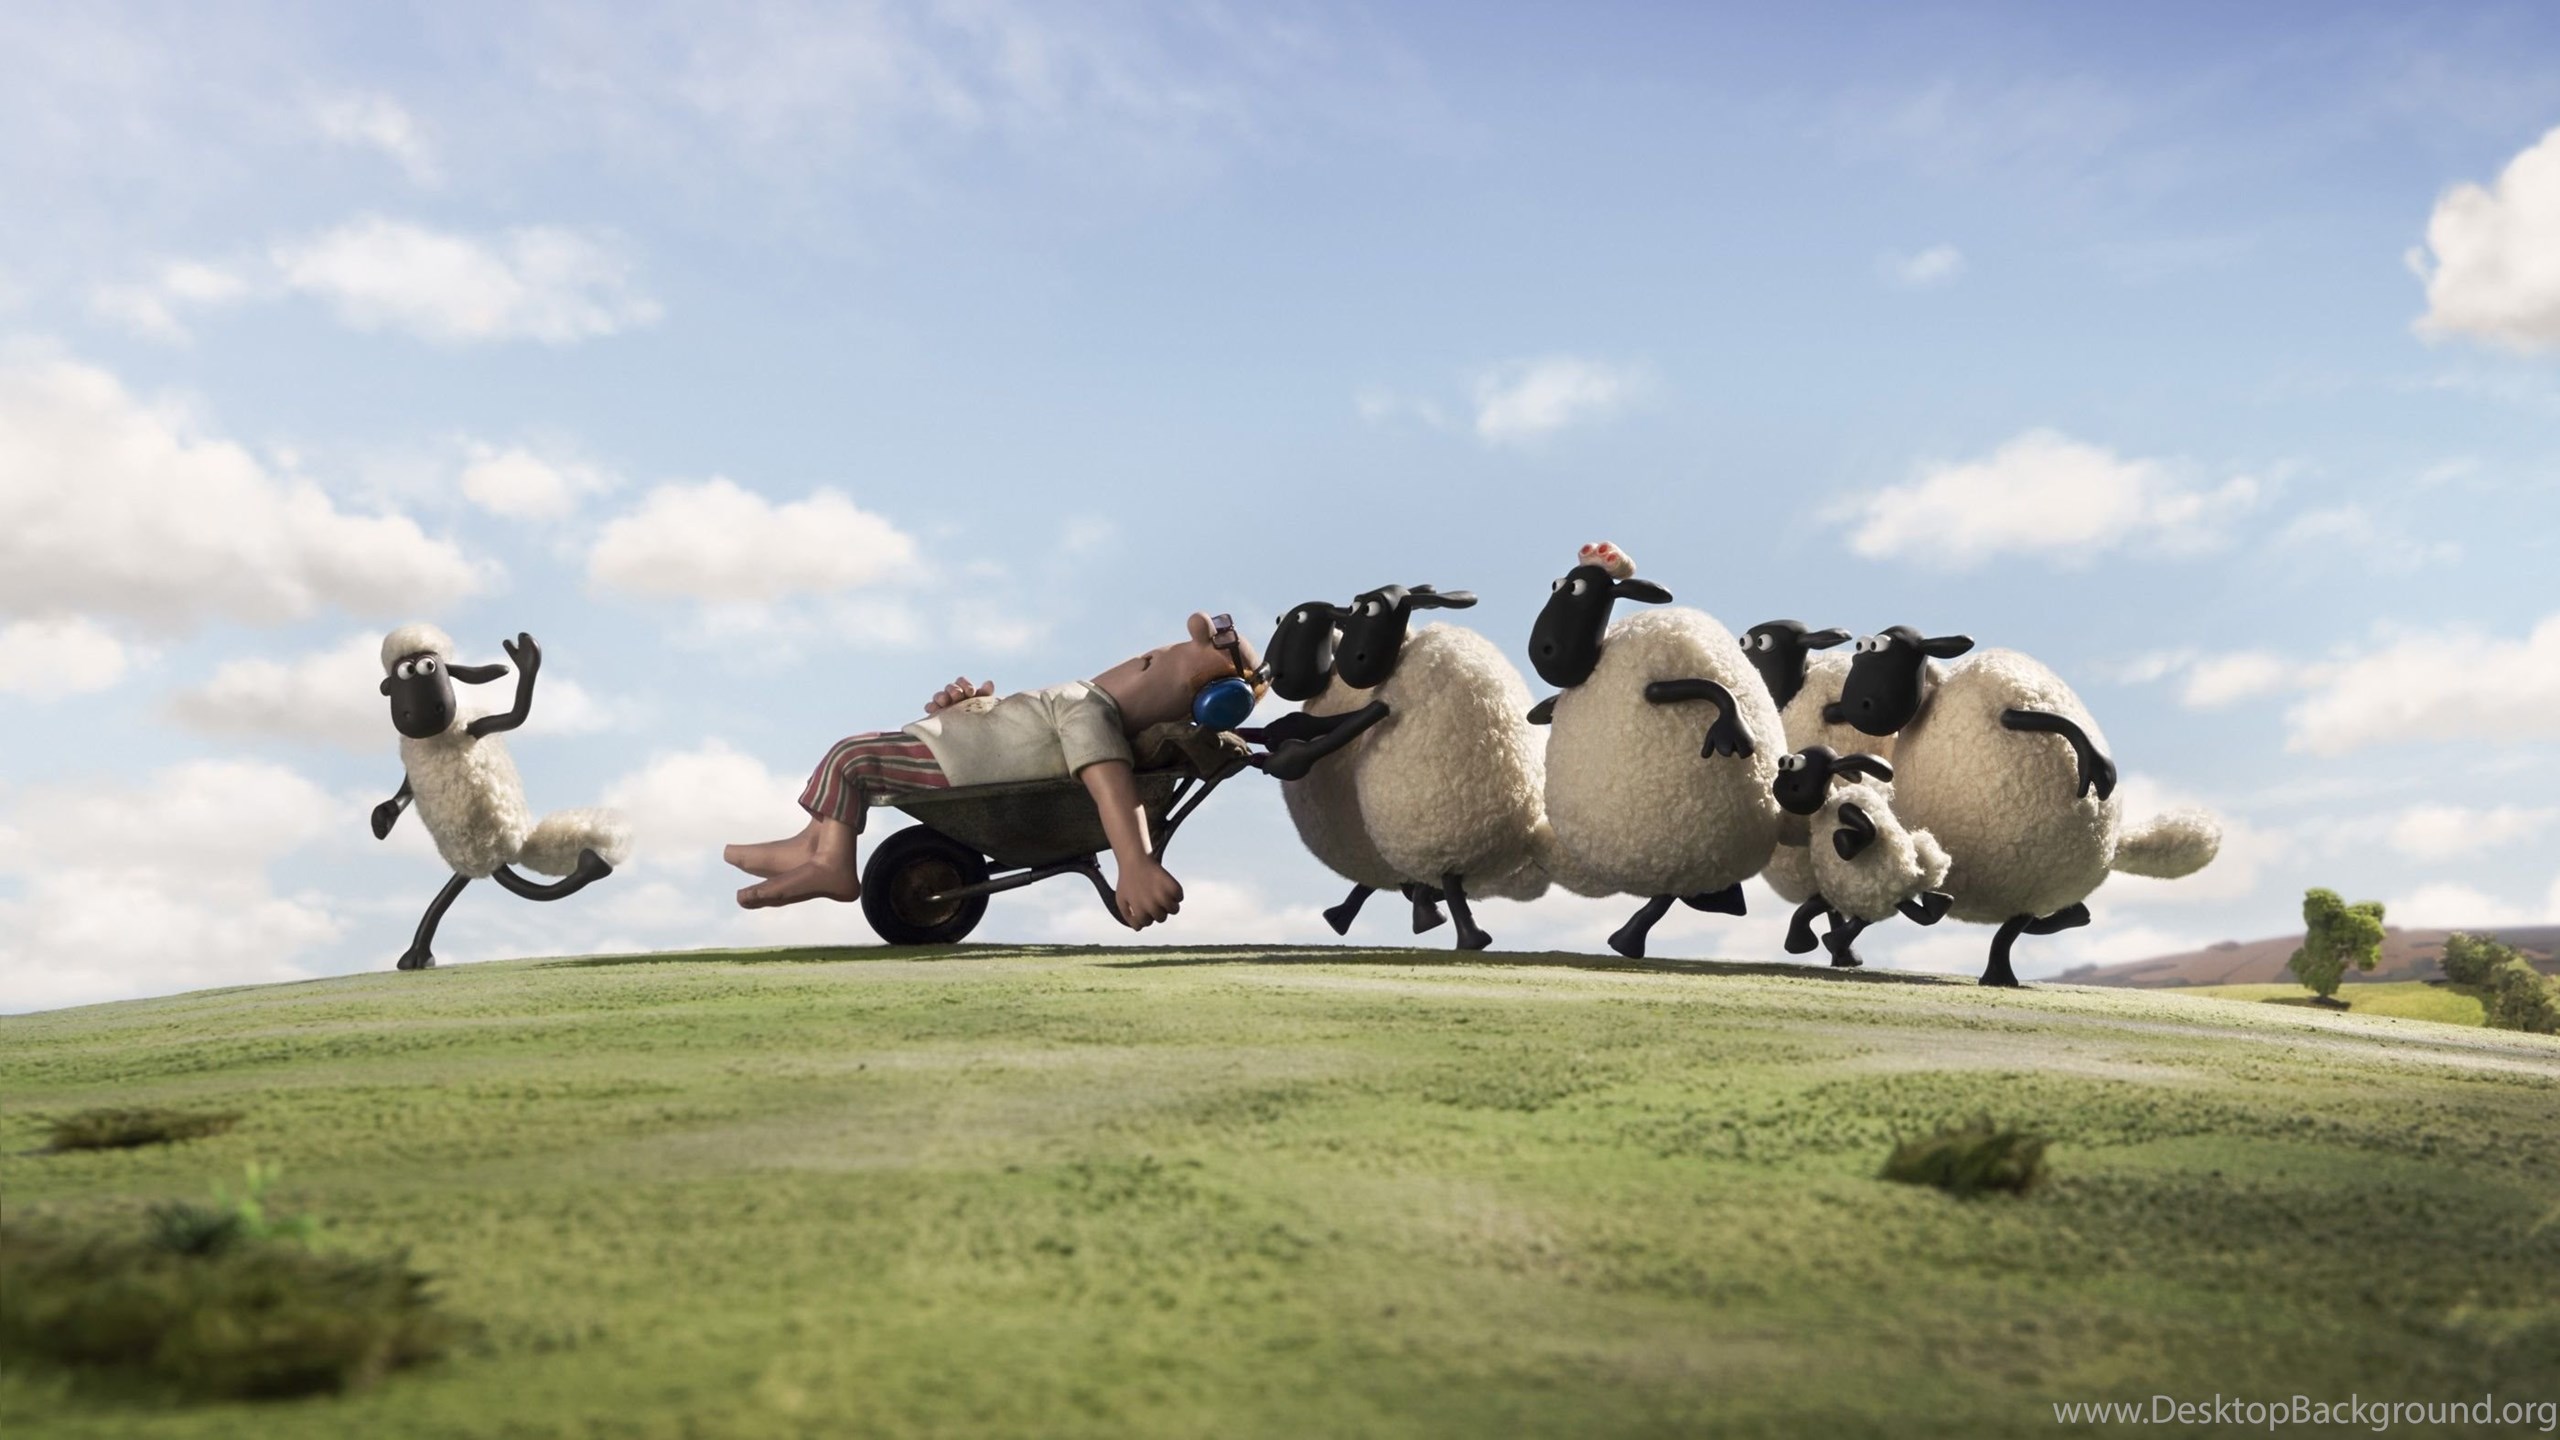 Funny Shaun The Sheep Movie Wallpapers Hd Desktop Background